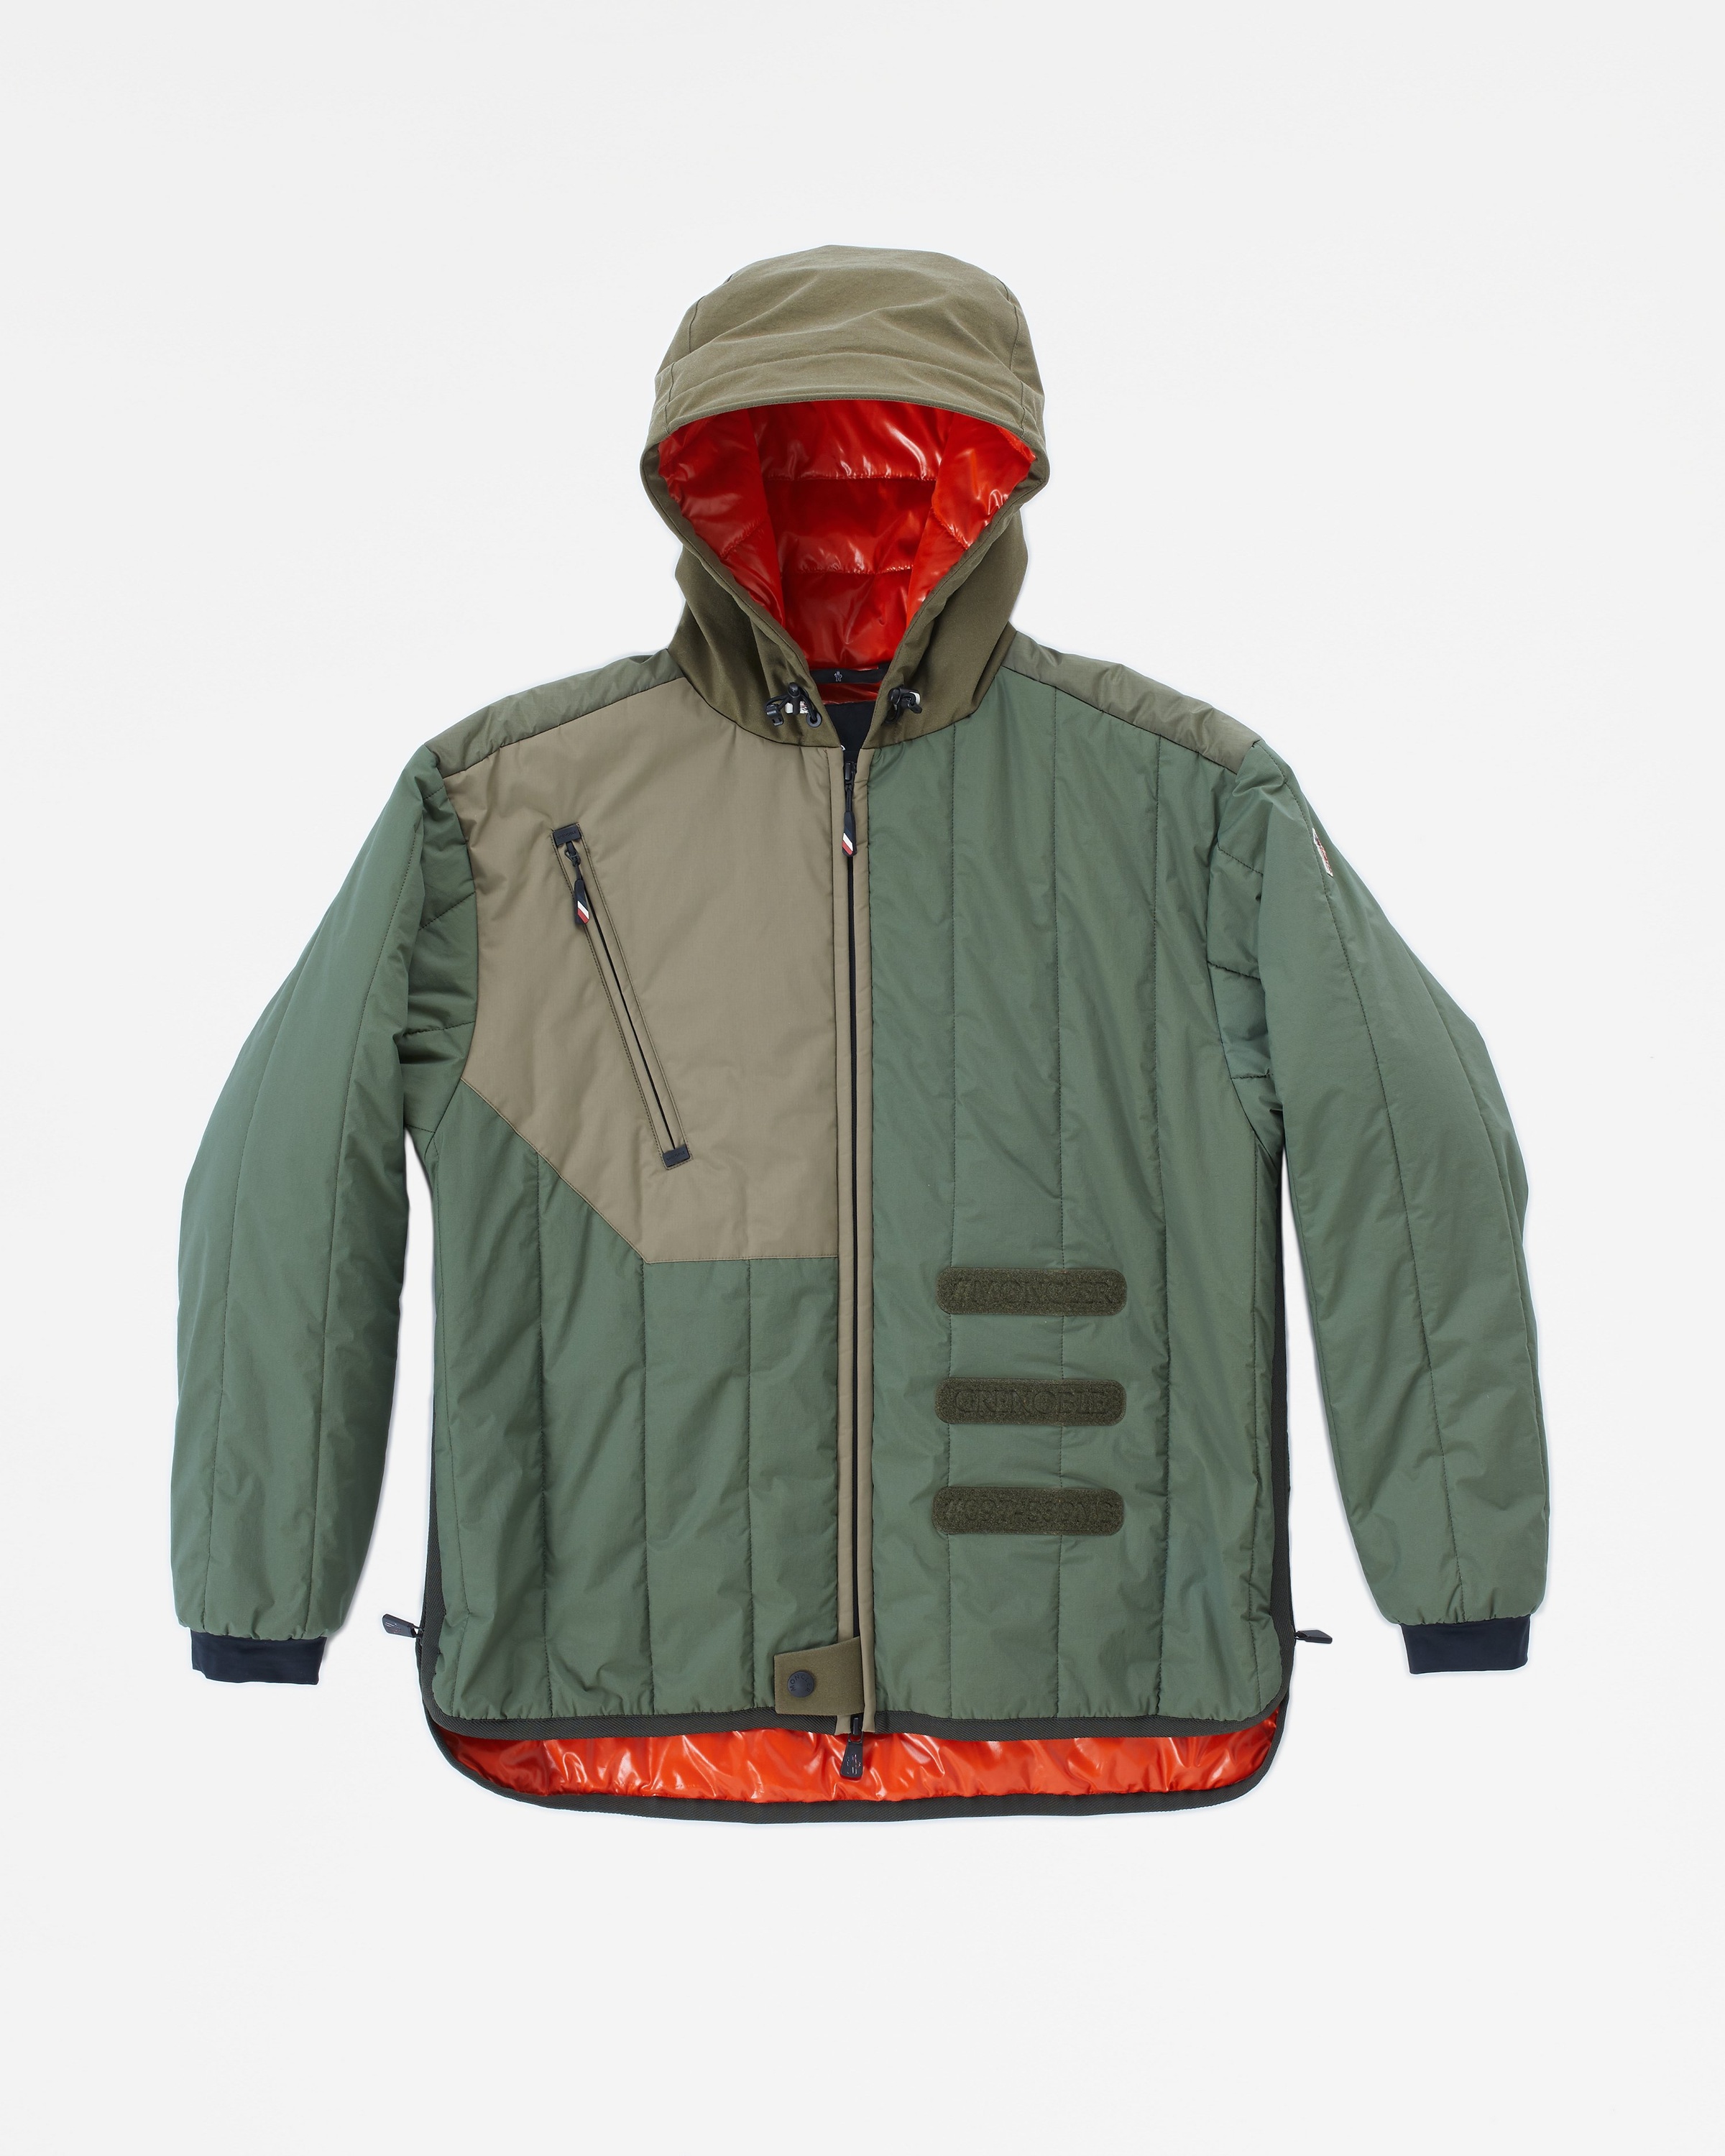 Moncler Genius – Recycled Indren Jacket - Outerwear - Green - Image 1